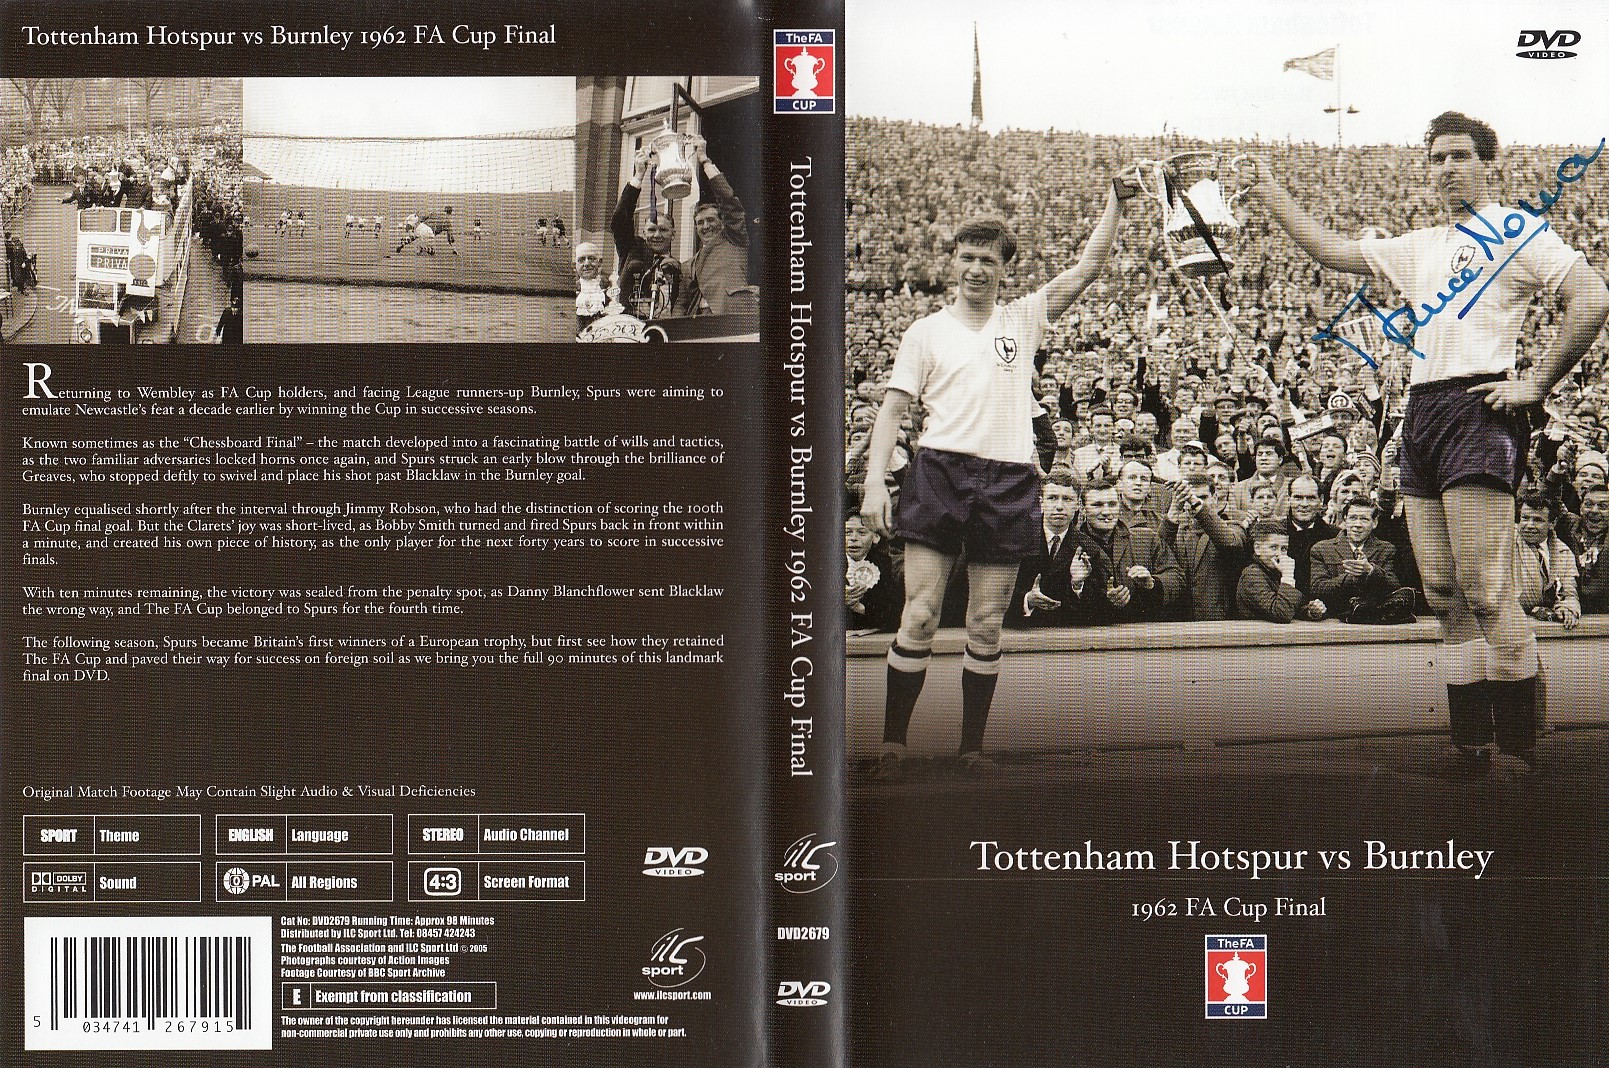 Autographed DVD 1962 FA CUP FINAL : New and unwatched DVD depicting the 1962 FA Cup Final, Burnley v